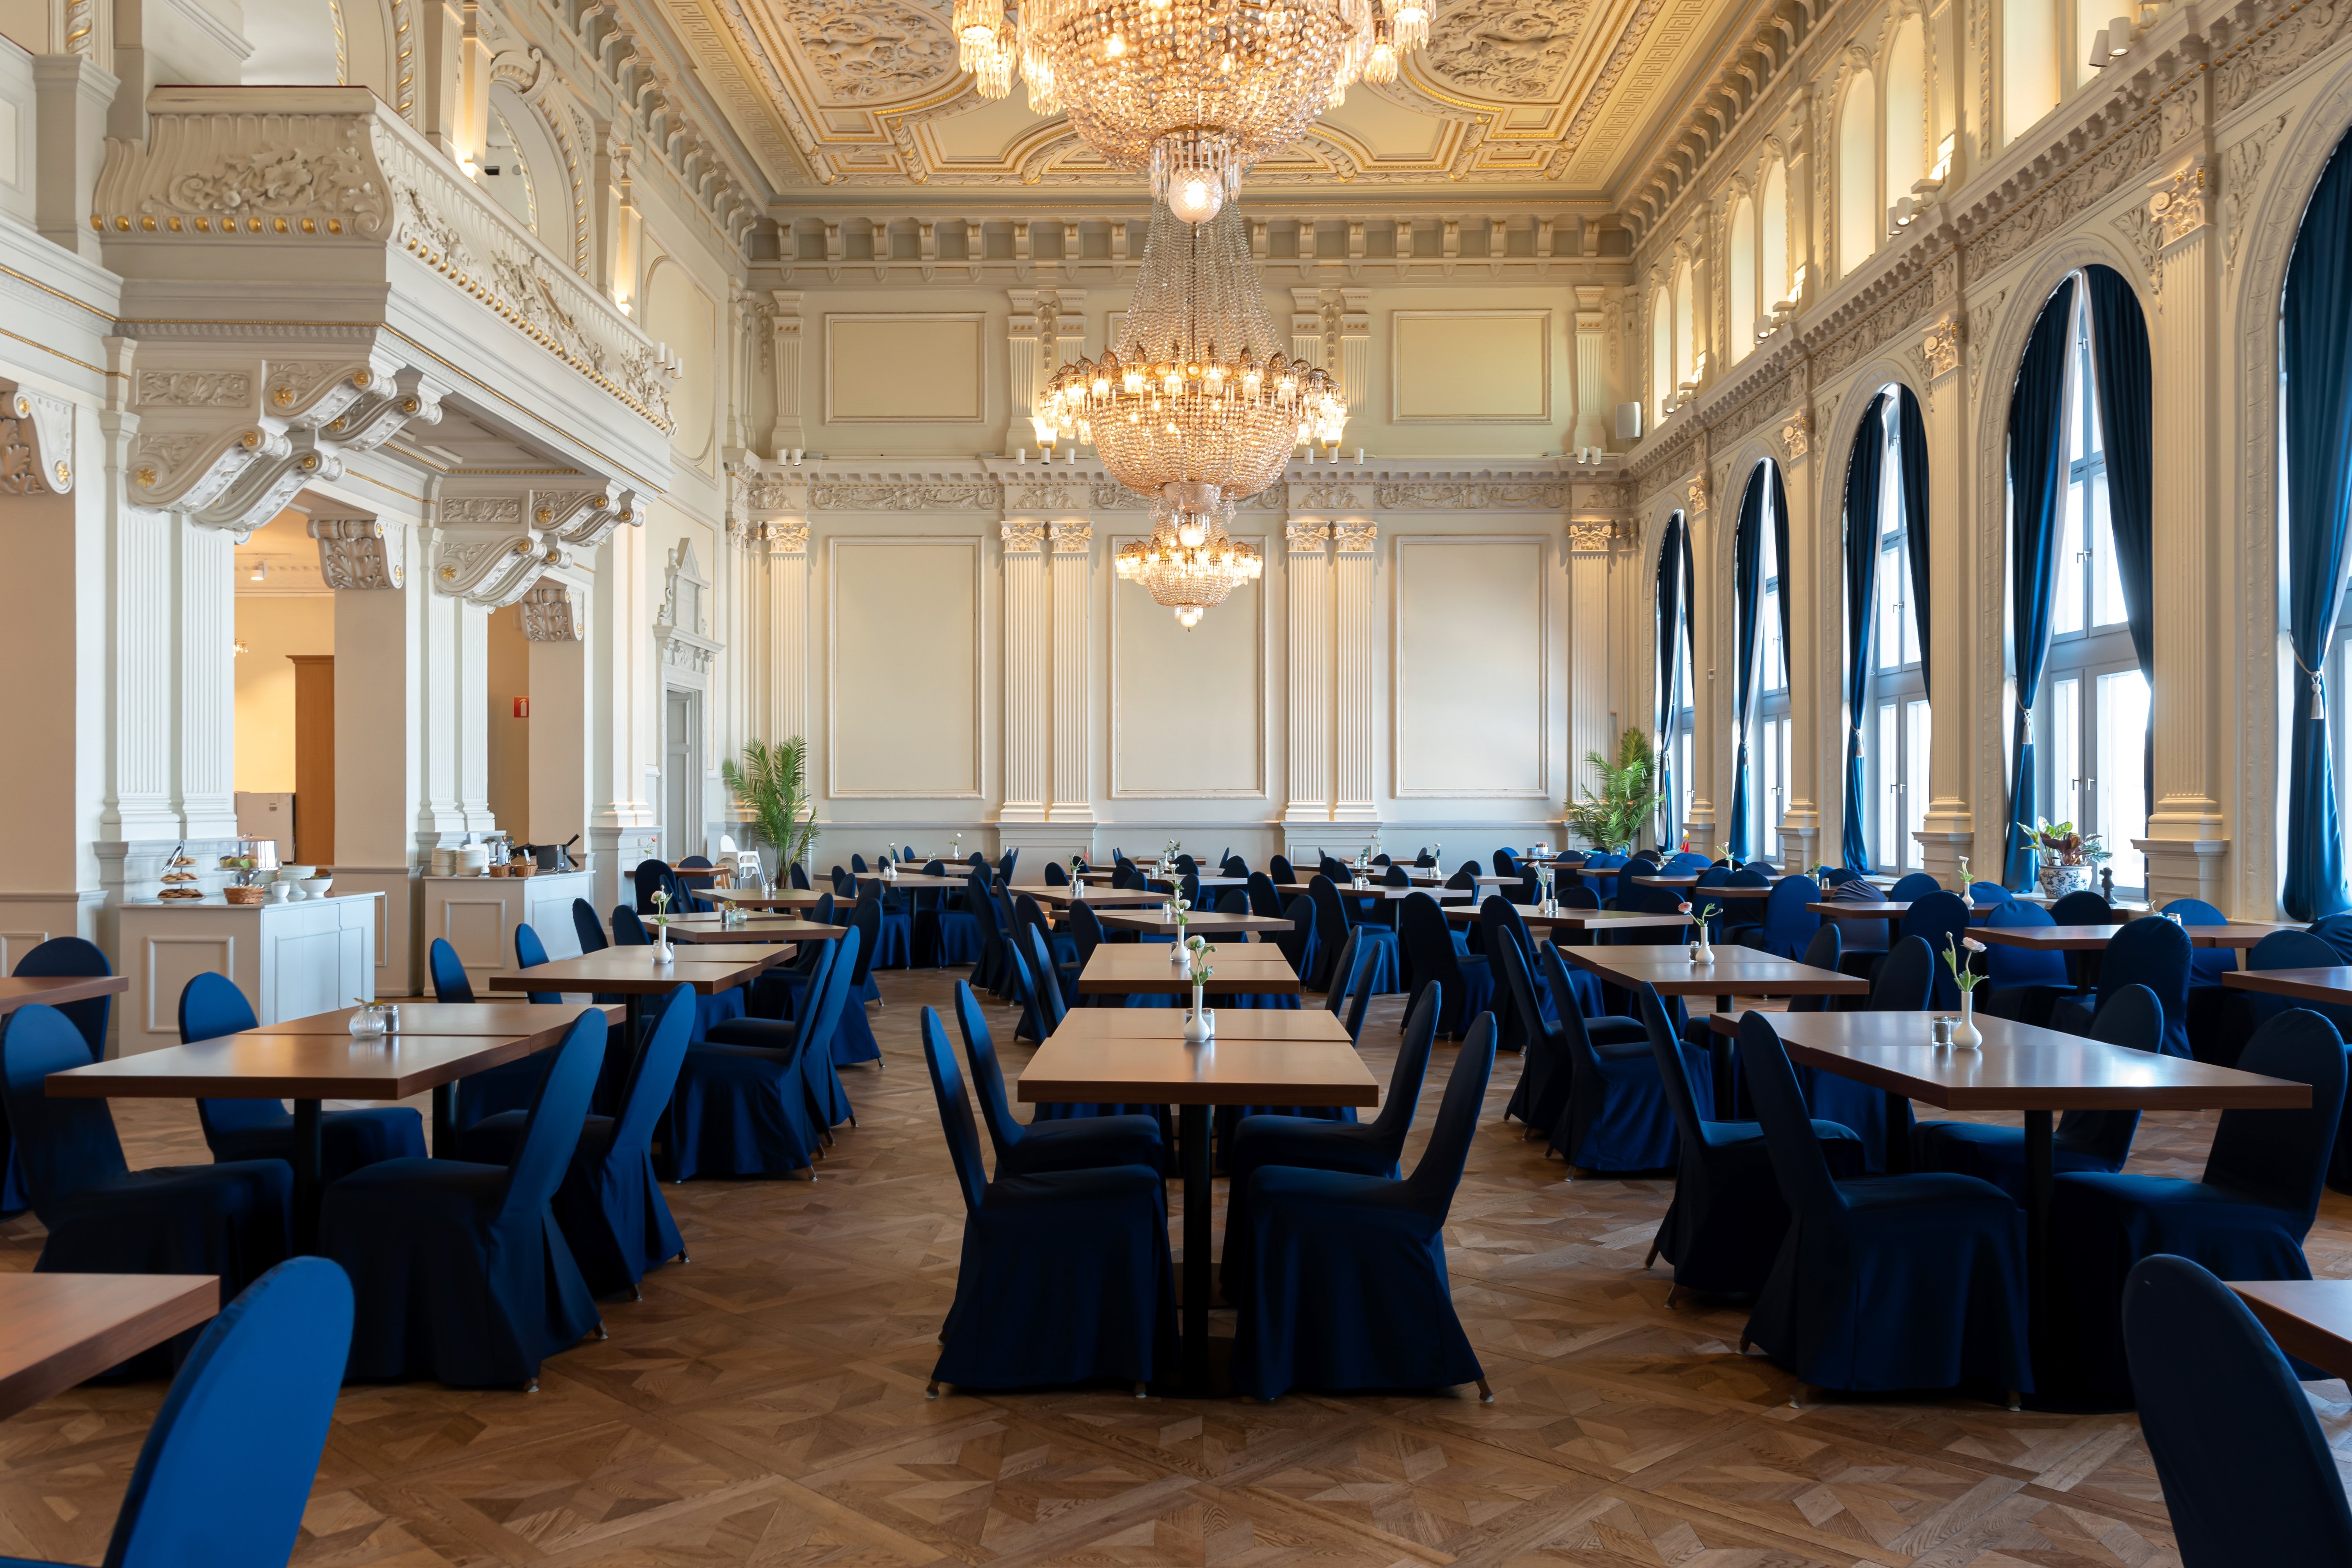 A grand hall with tables and seating